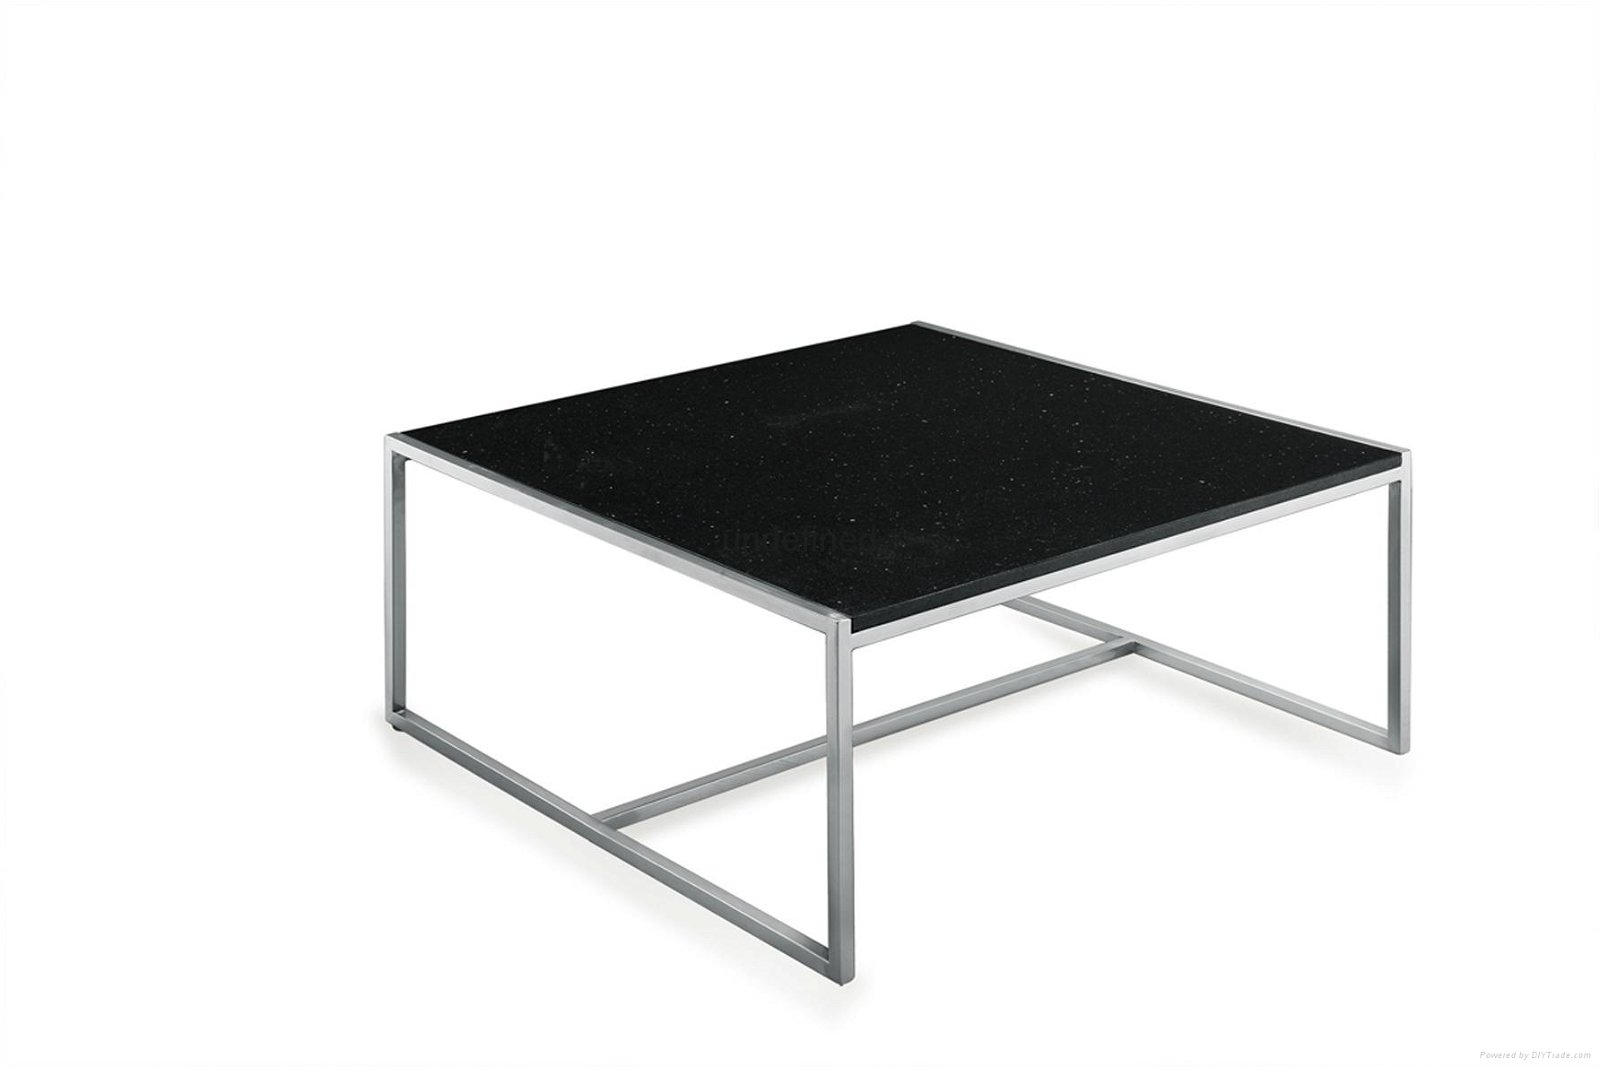 SHIMING MS-3365 black tempered glass end side table 3